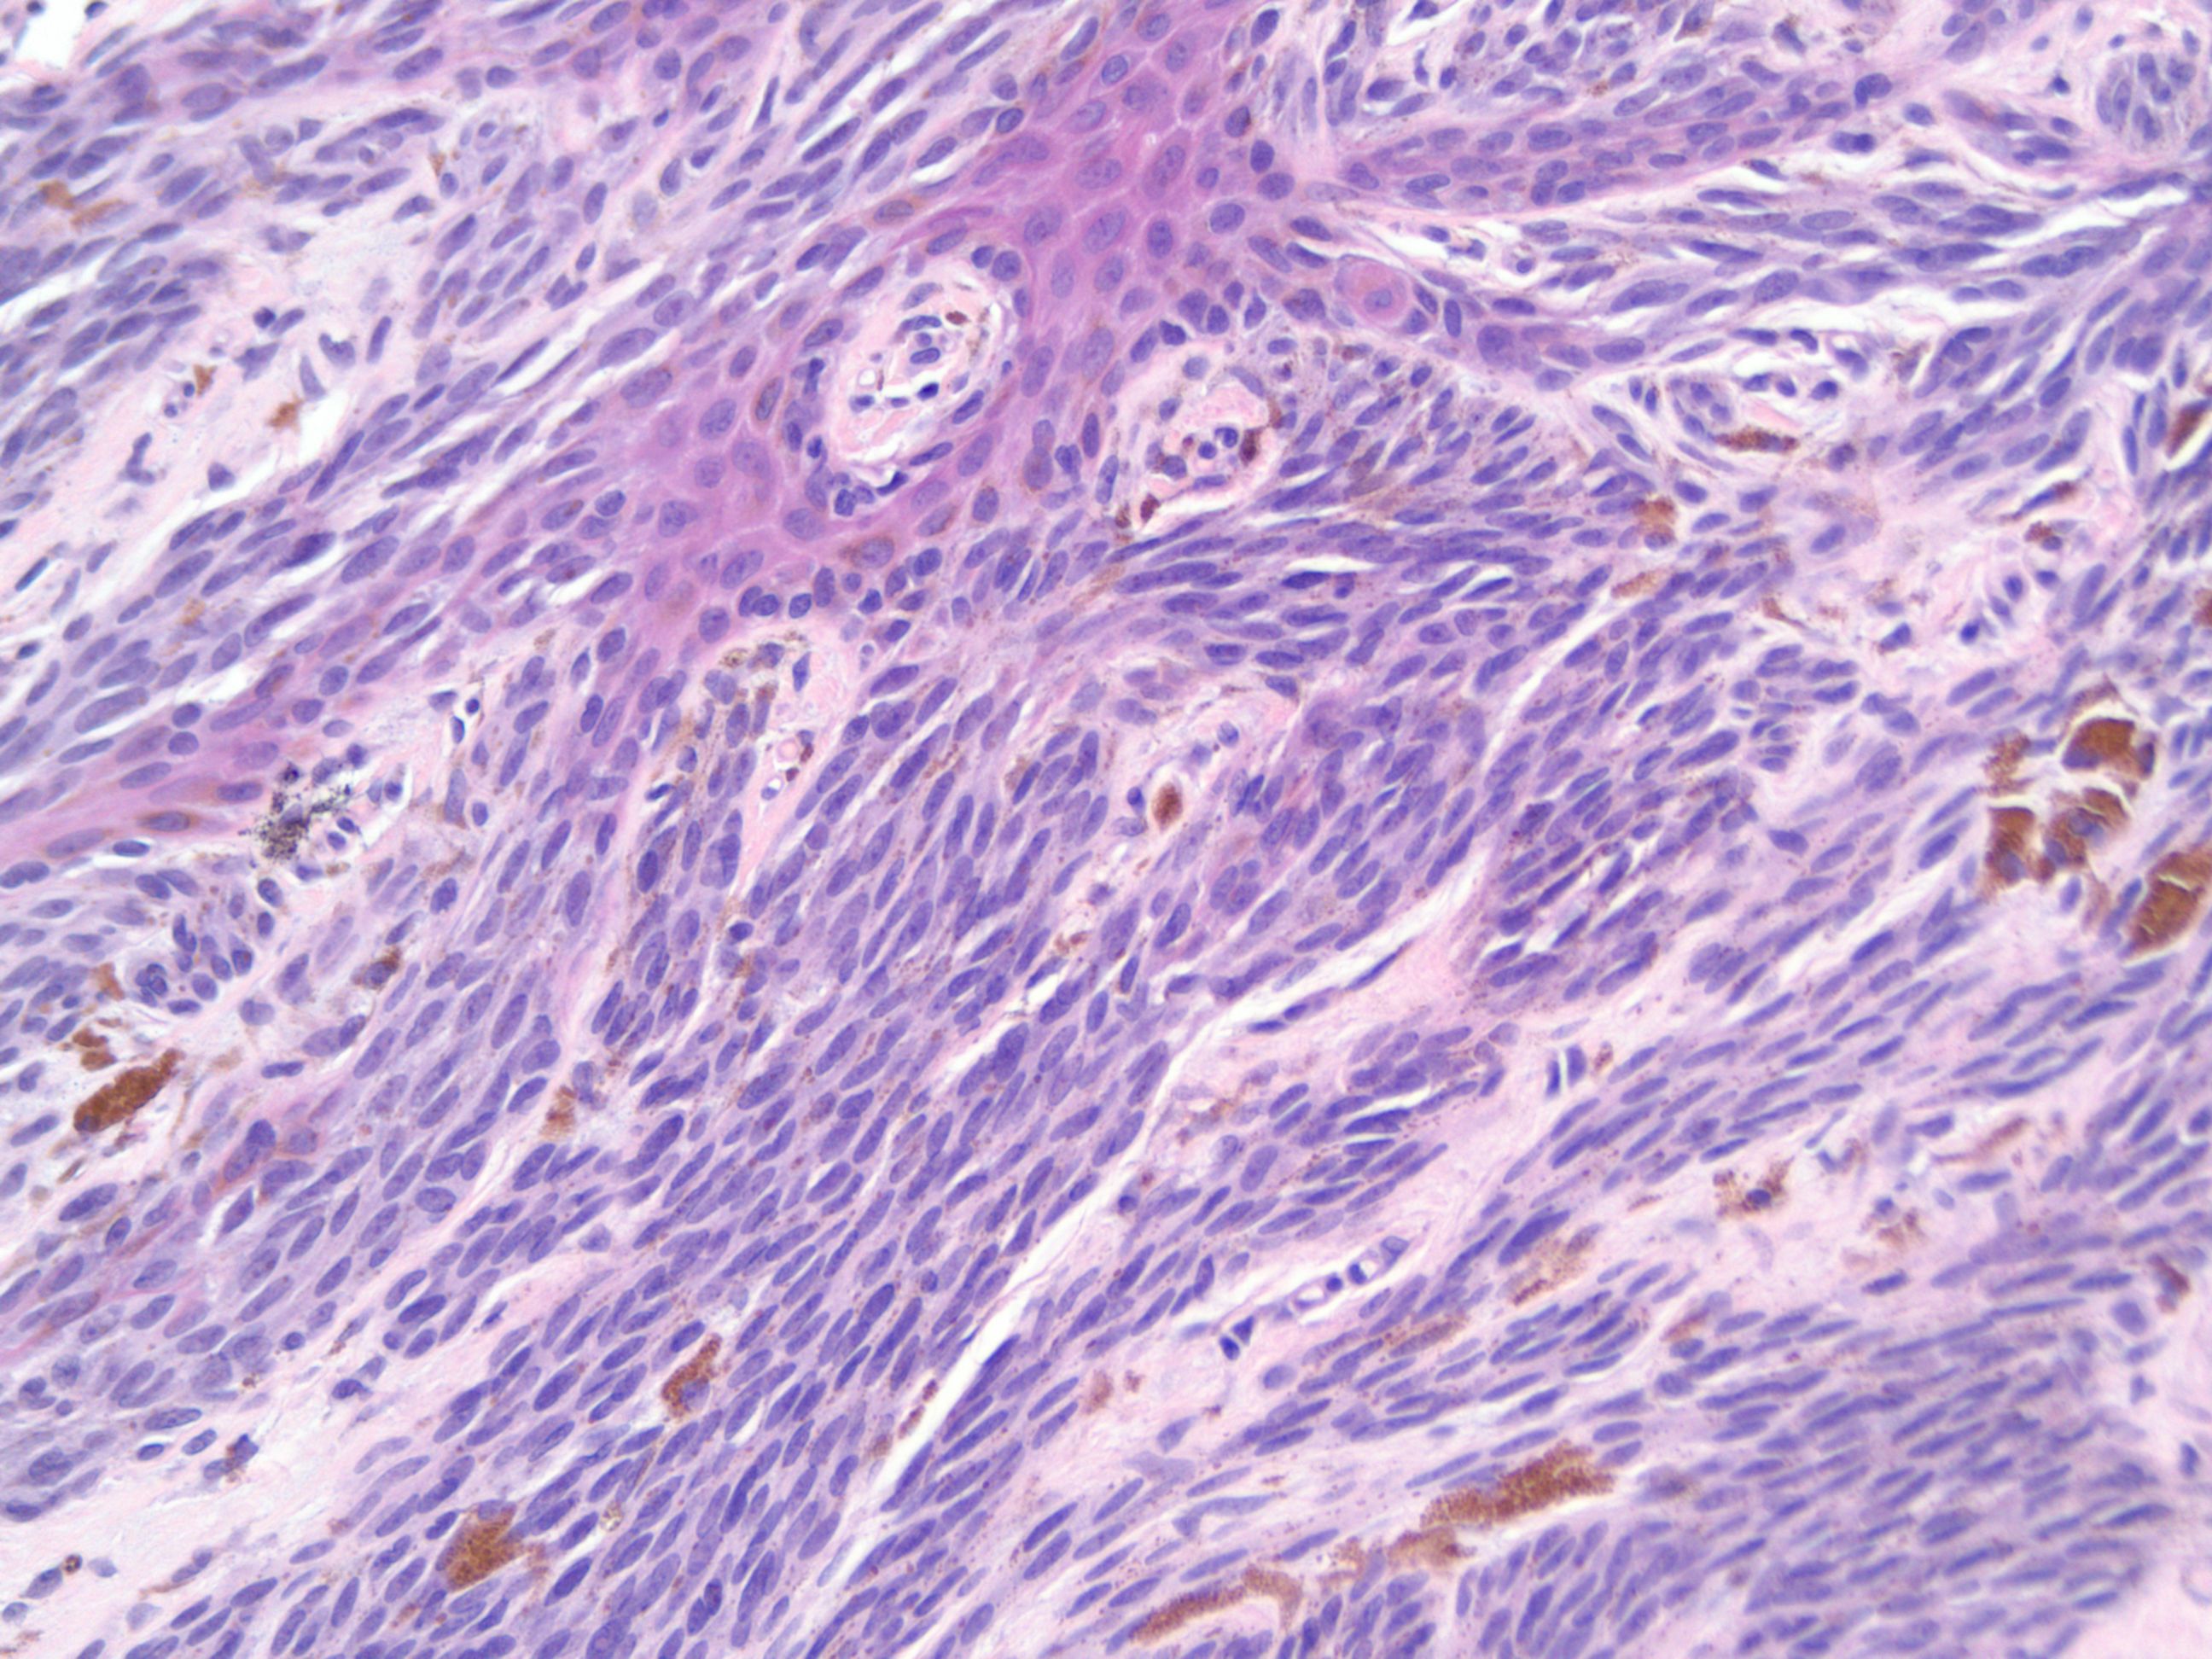 spindle cell melanoma